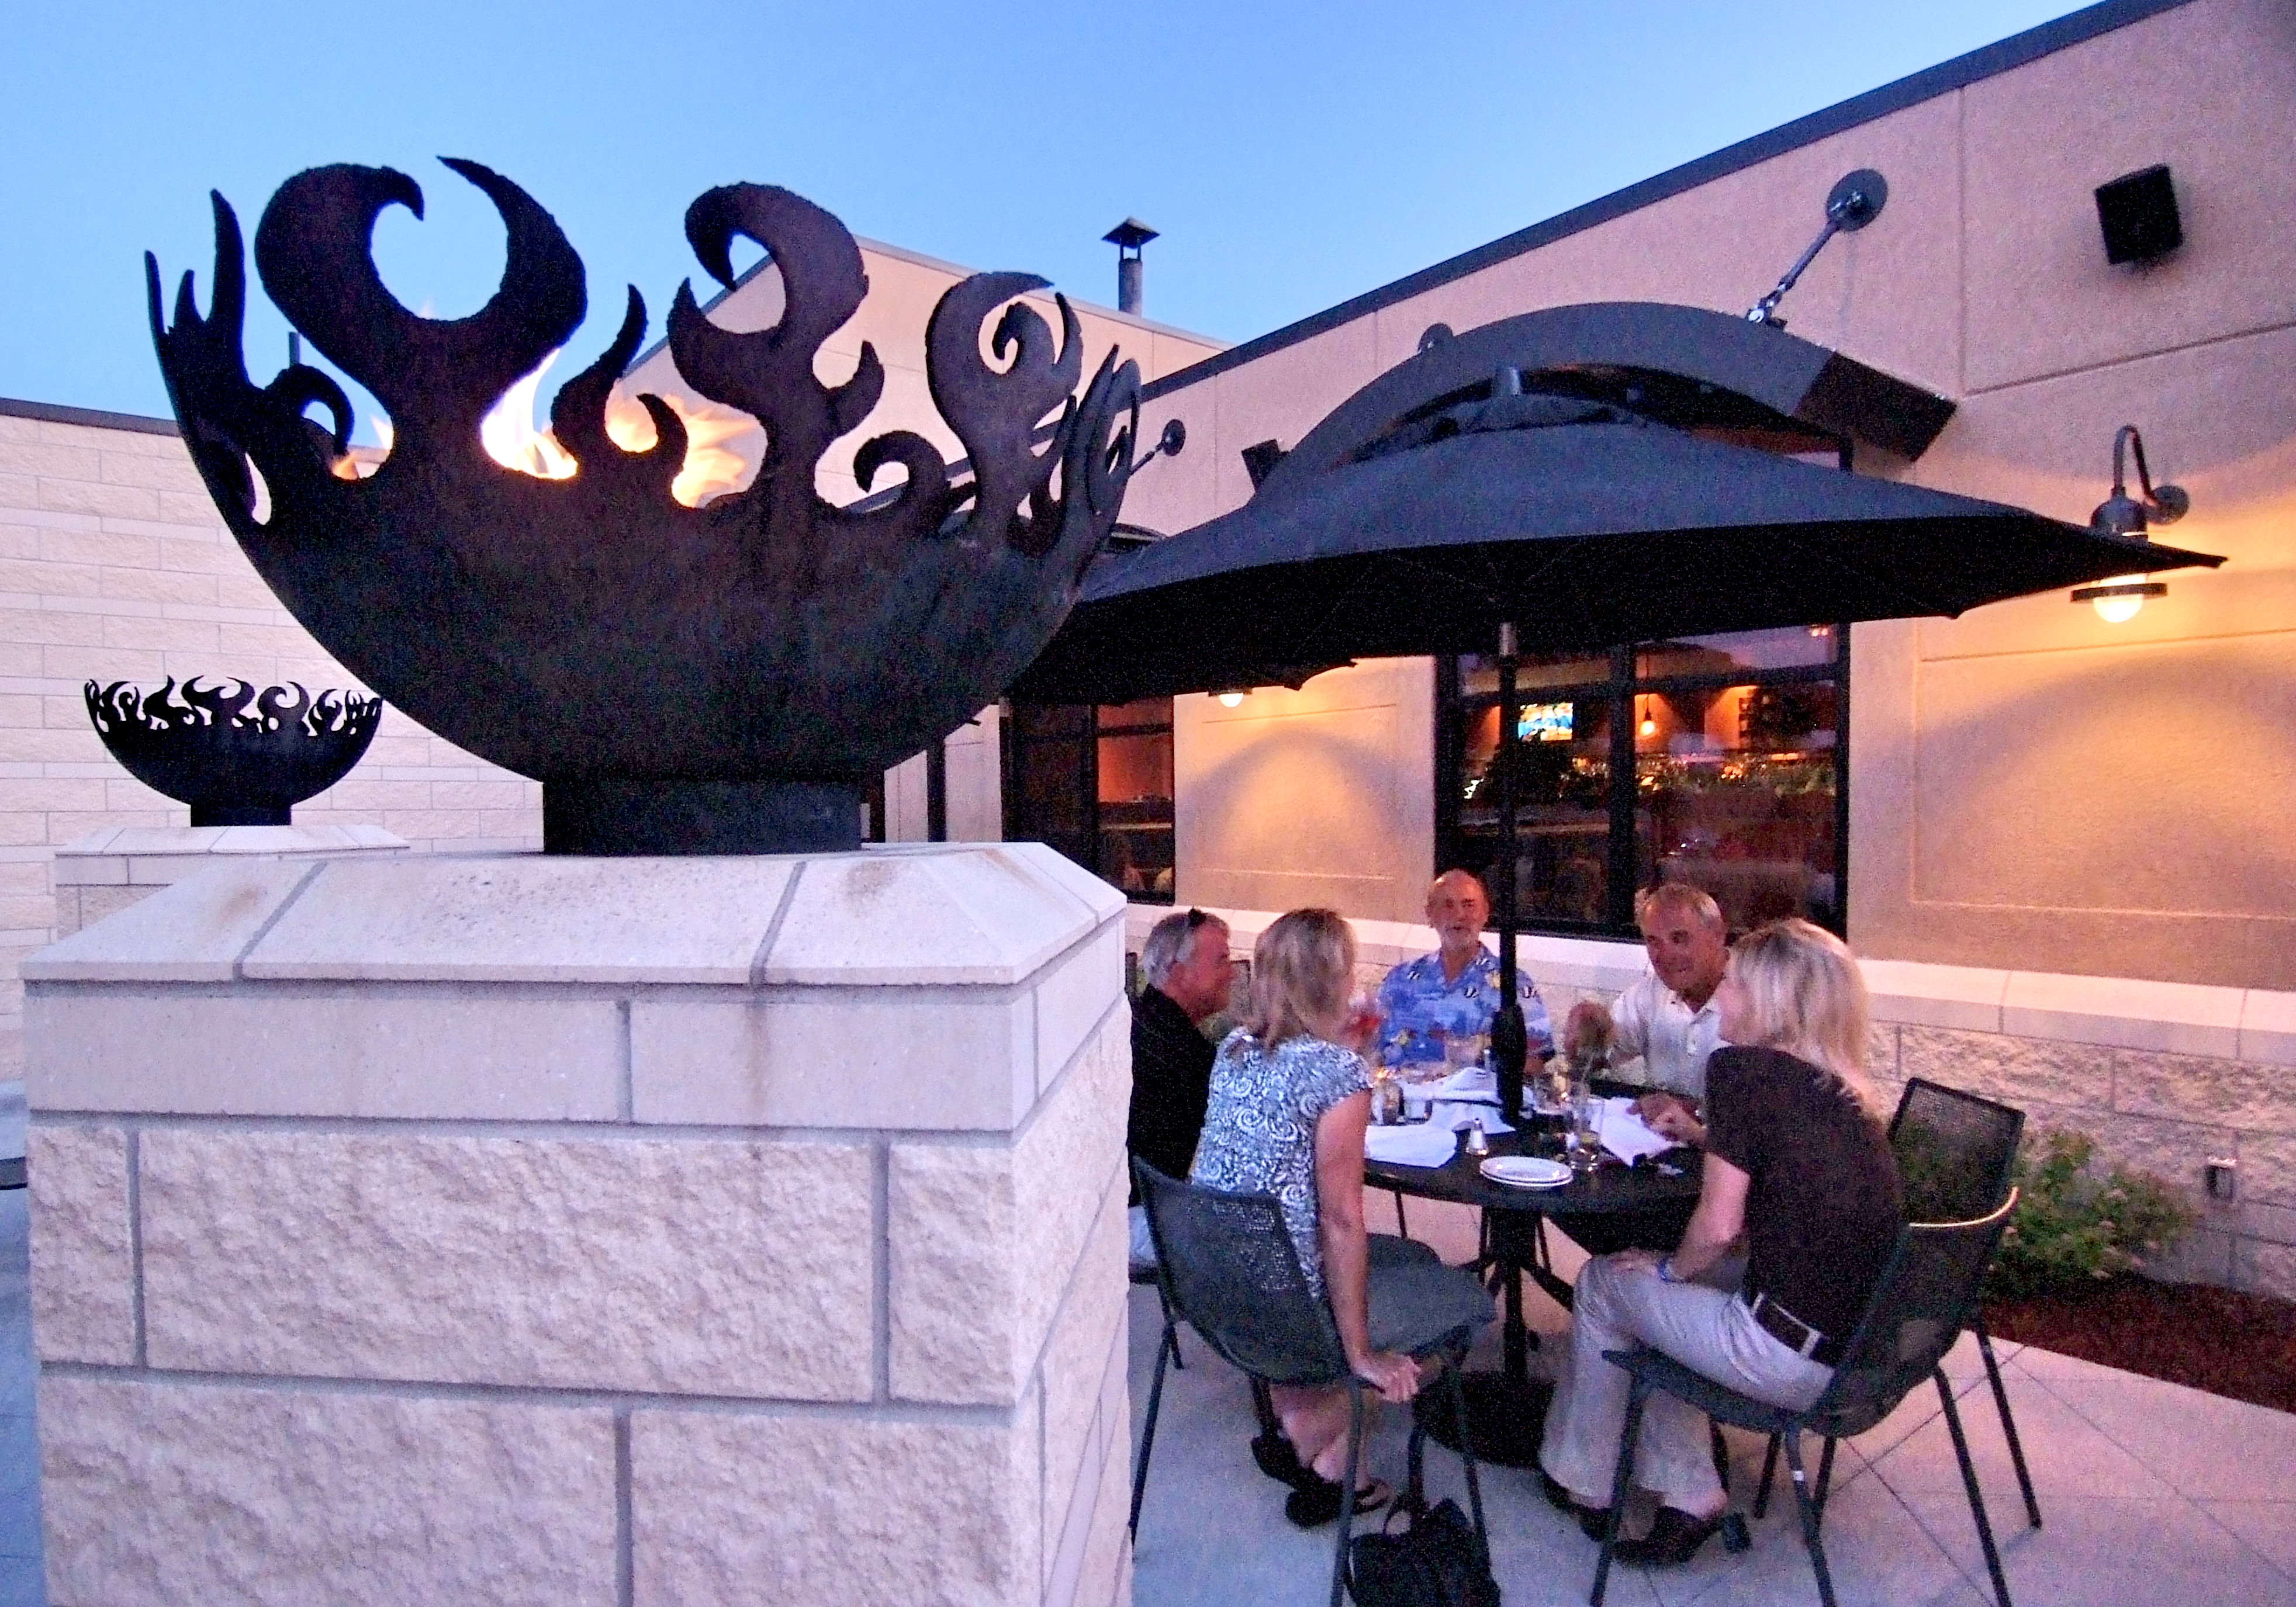 Great Bowl O' Fire 37 Inch Sculptural Firebowl™ at Brick Oven Courtyard Grille Topeka, KS